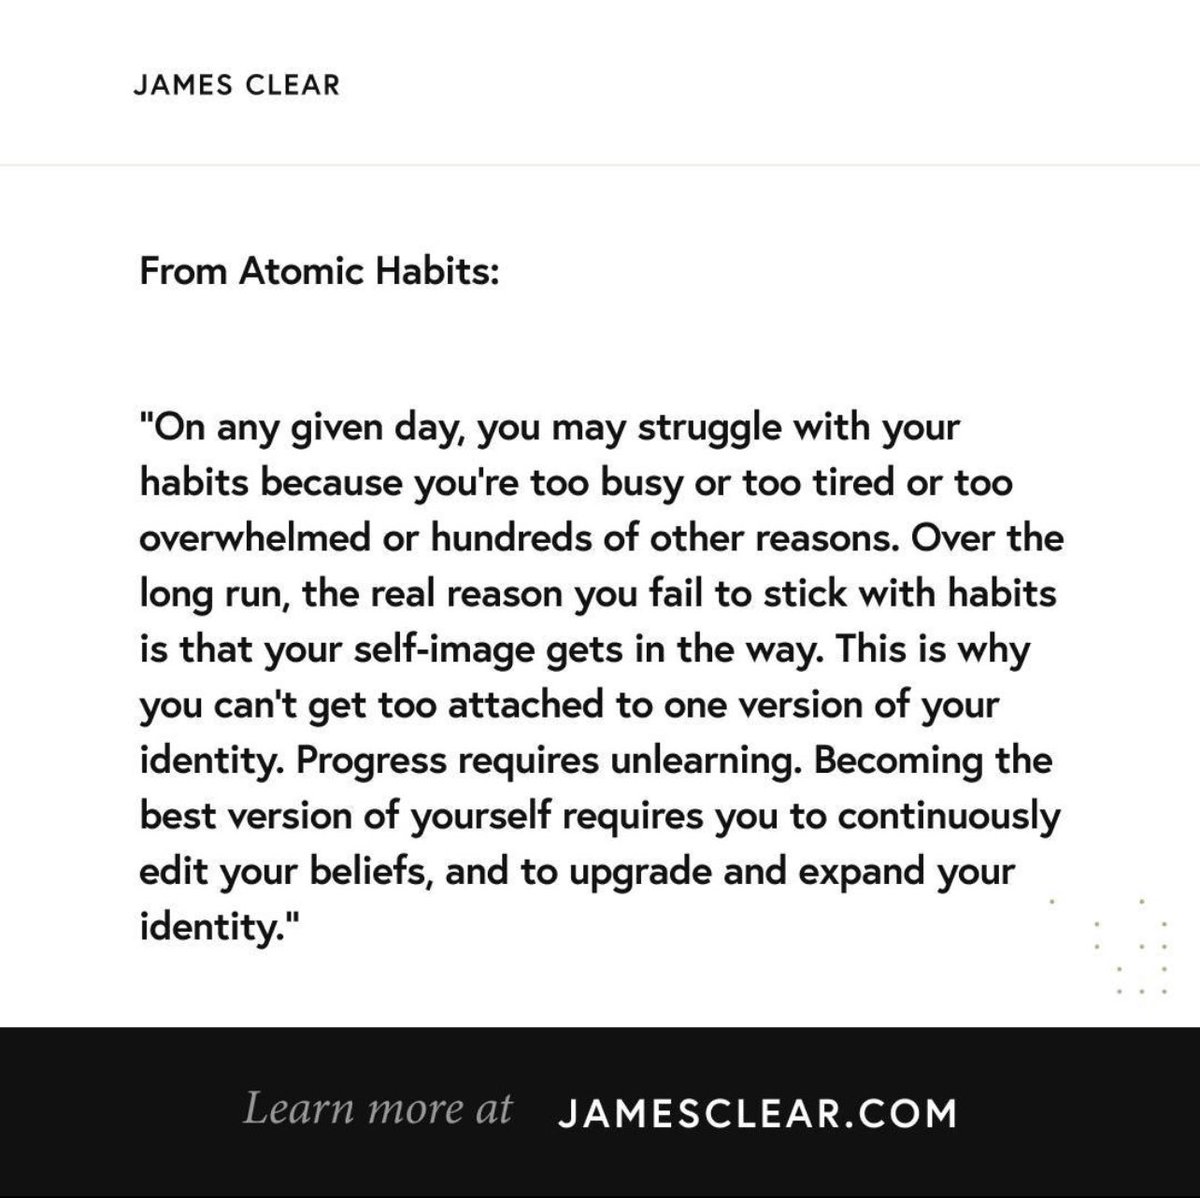 LOVE this book “Atomic Habits” by James Clear. What are you reading? #Sober #SoberAF #Recovery #RecoveryPosse #Addiction #SoberSupport #MentalHealthMatters